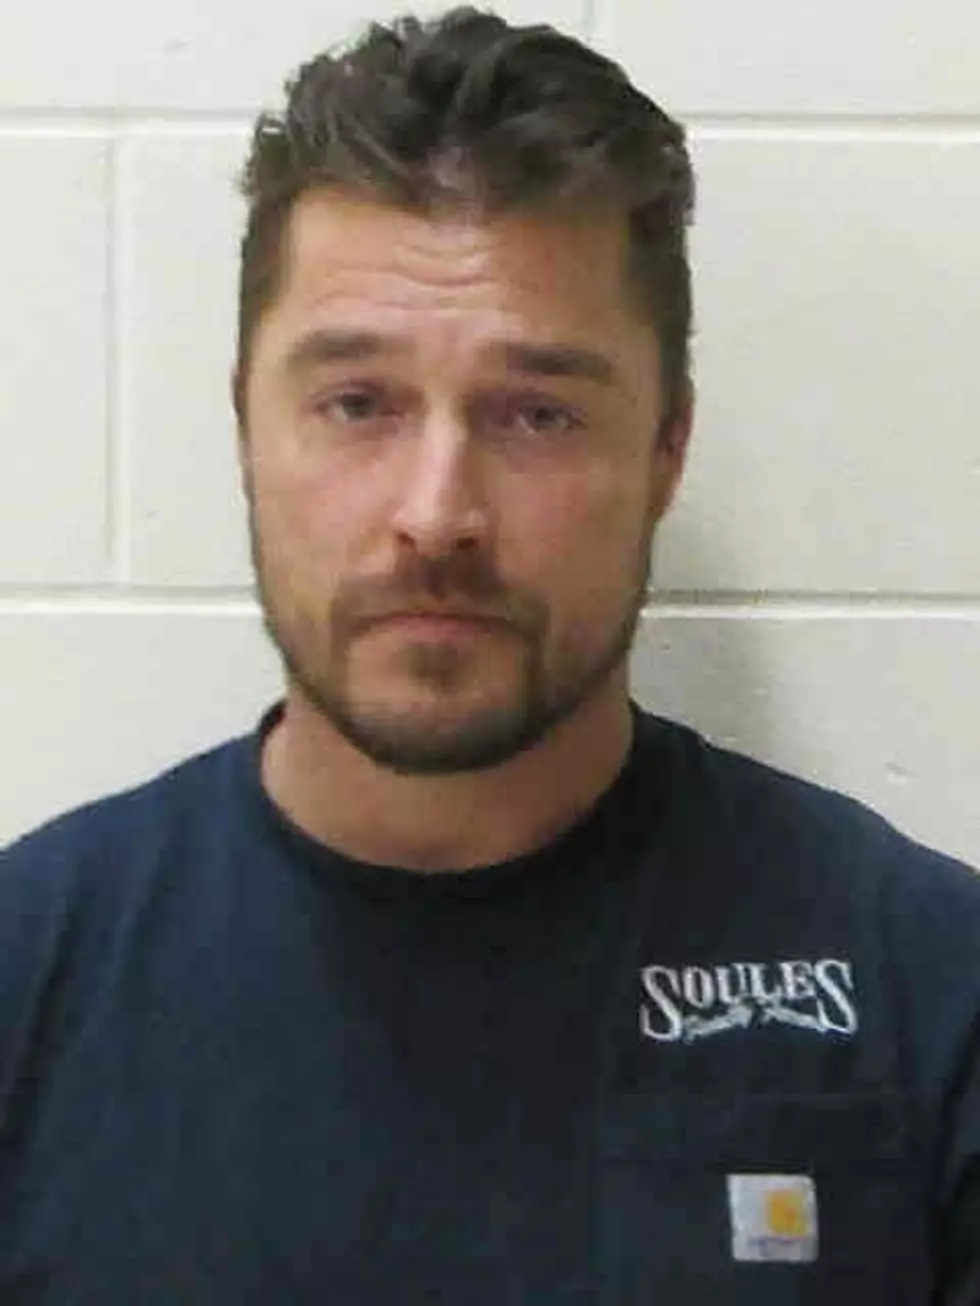 Attorney’s For Chris Soules Ask For Dismissal